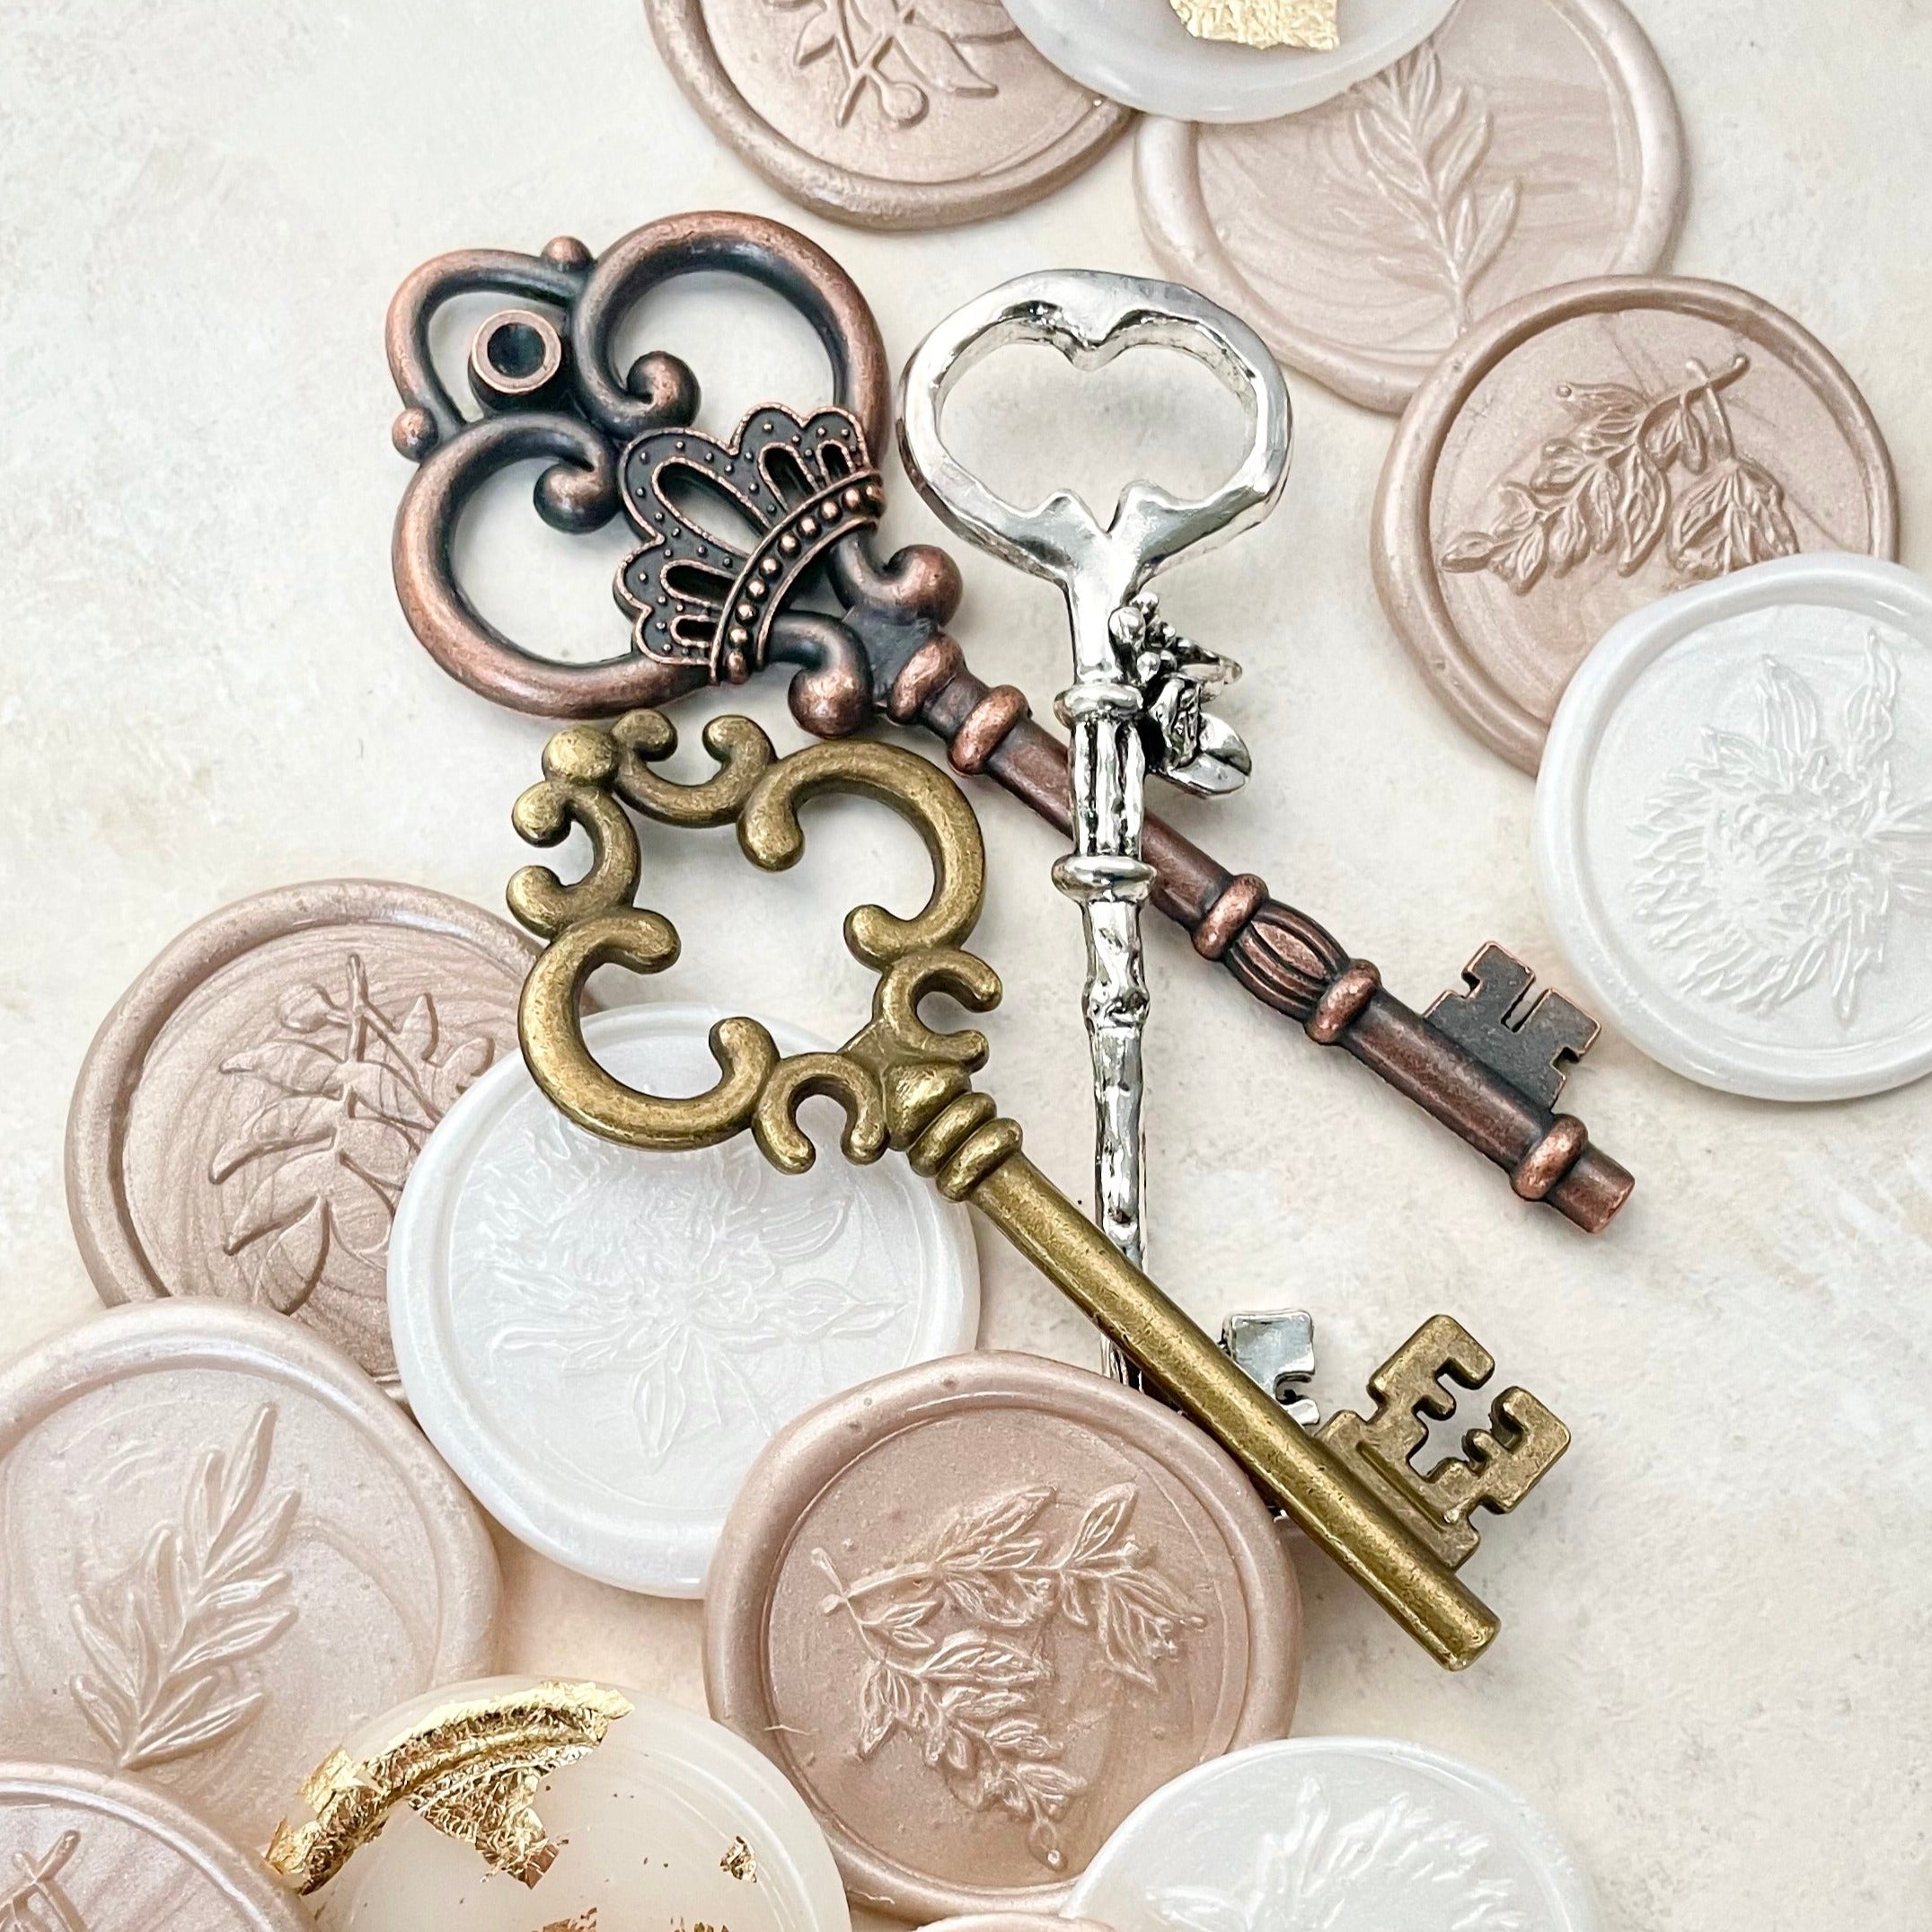 3 keys, gold, bronze and silver and 10 champagne wax seals - Wedding Flat lay props from Champagne & GRIT